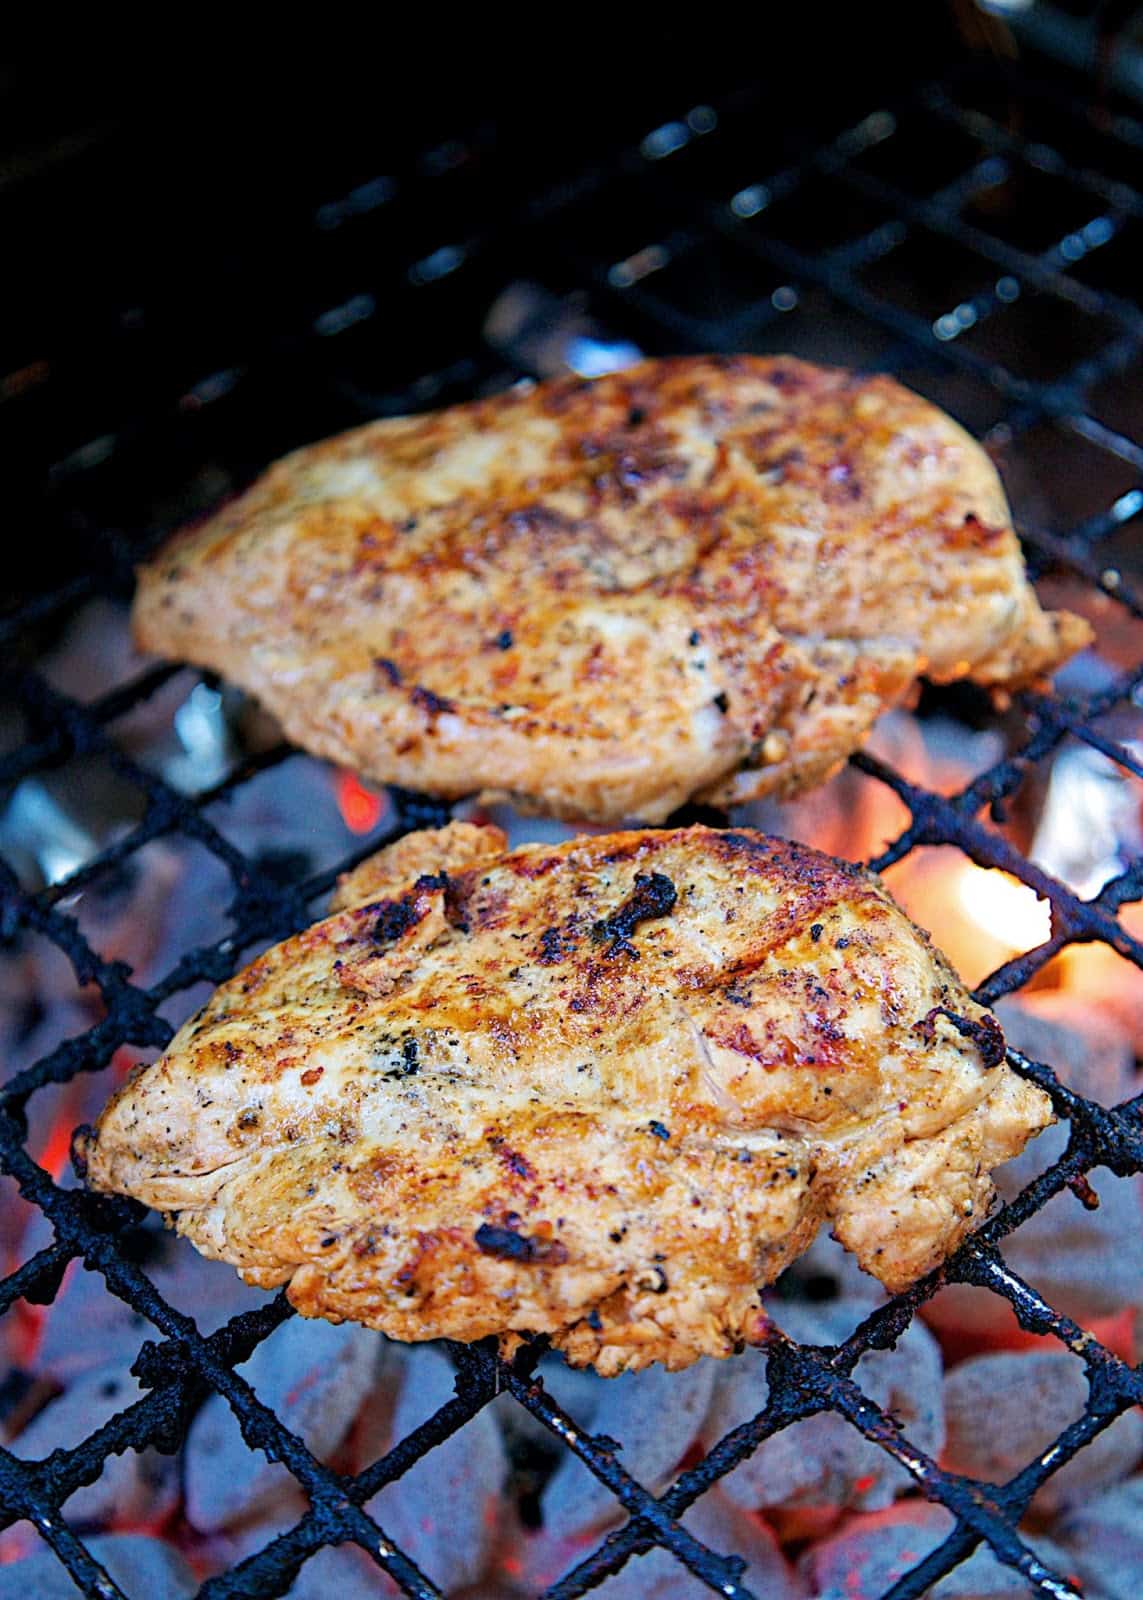 Mexican Lime Grilled Chicken Recipe - Fiesta Lime Grilled Chicken - chicken marinated in lime juice and Mexican spice blend. Super juicy and packed with tons of flavor! Great Mexican Recipe.